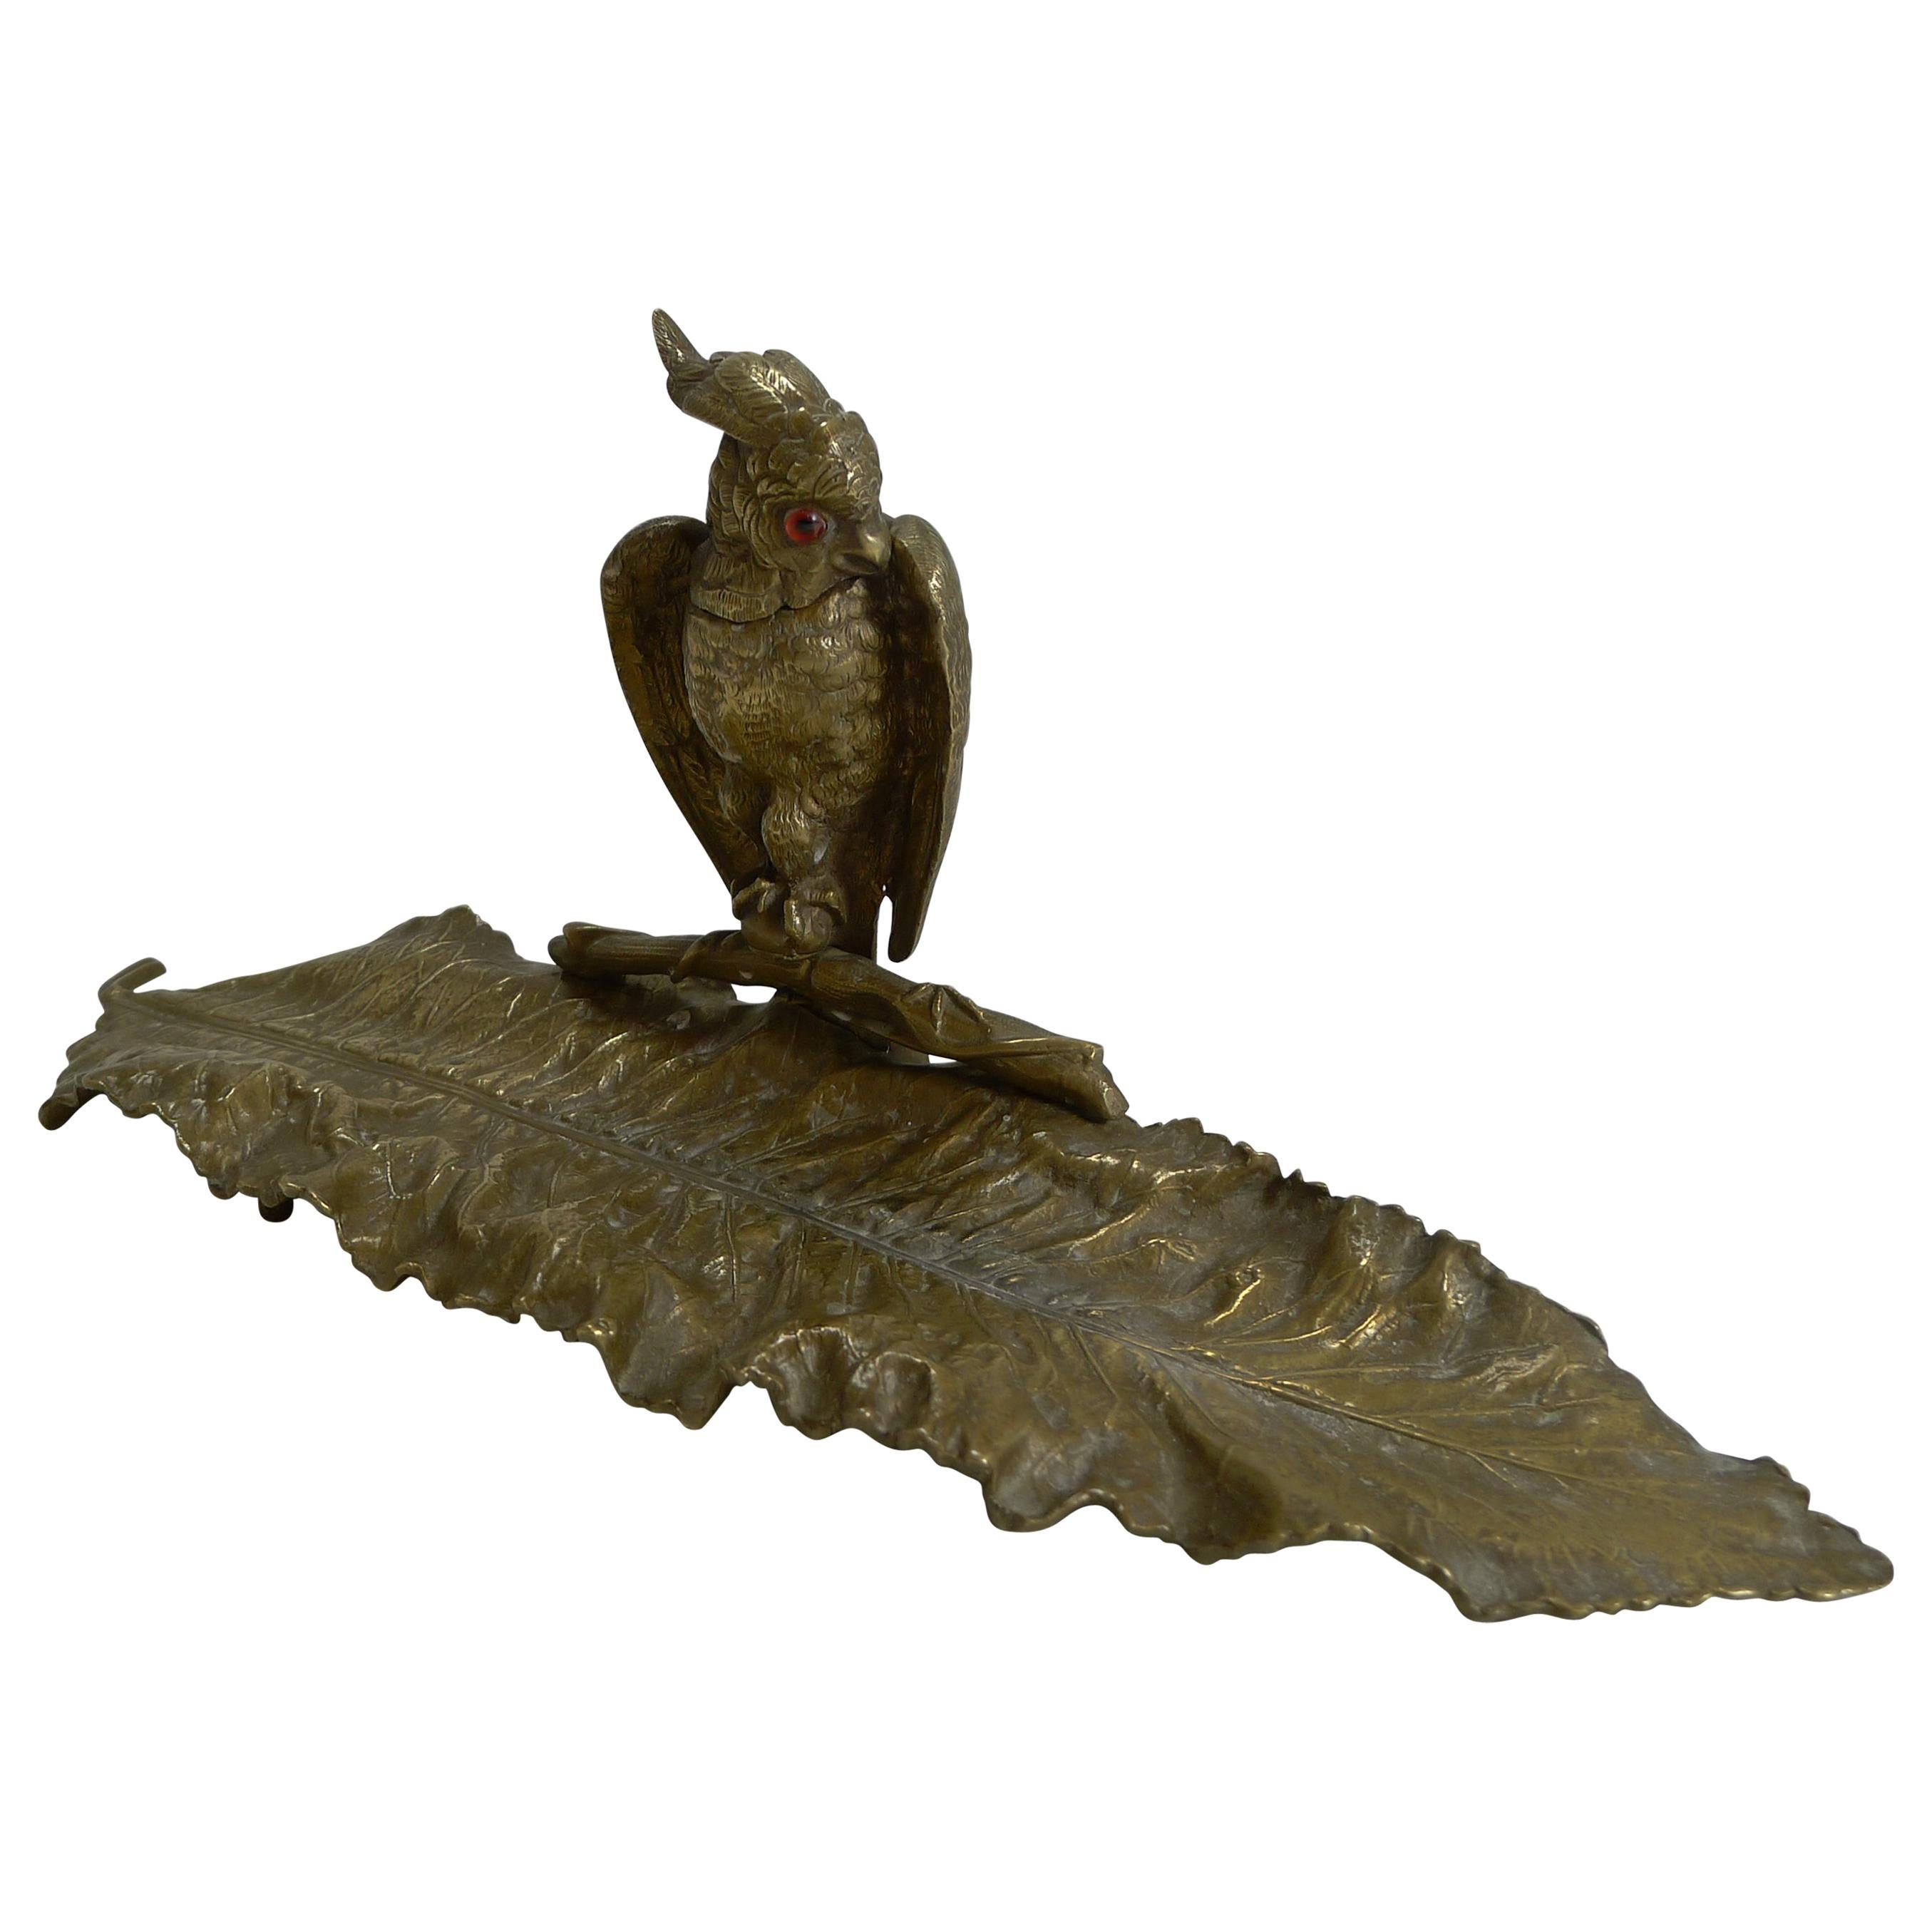 Magnificent Antique English Novelty Inkwell / Pen Tray - Parrot With Glass Eyes For Sale